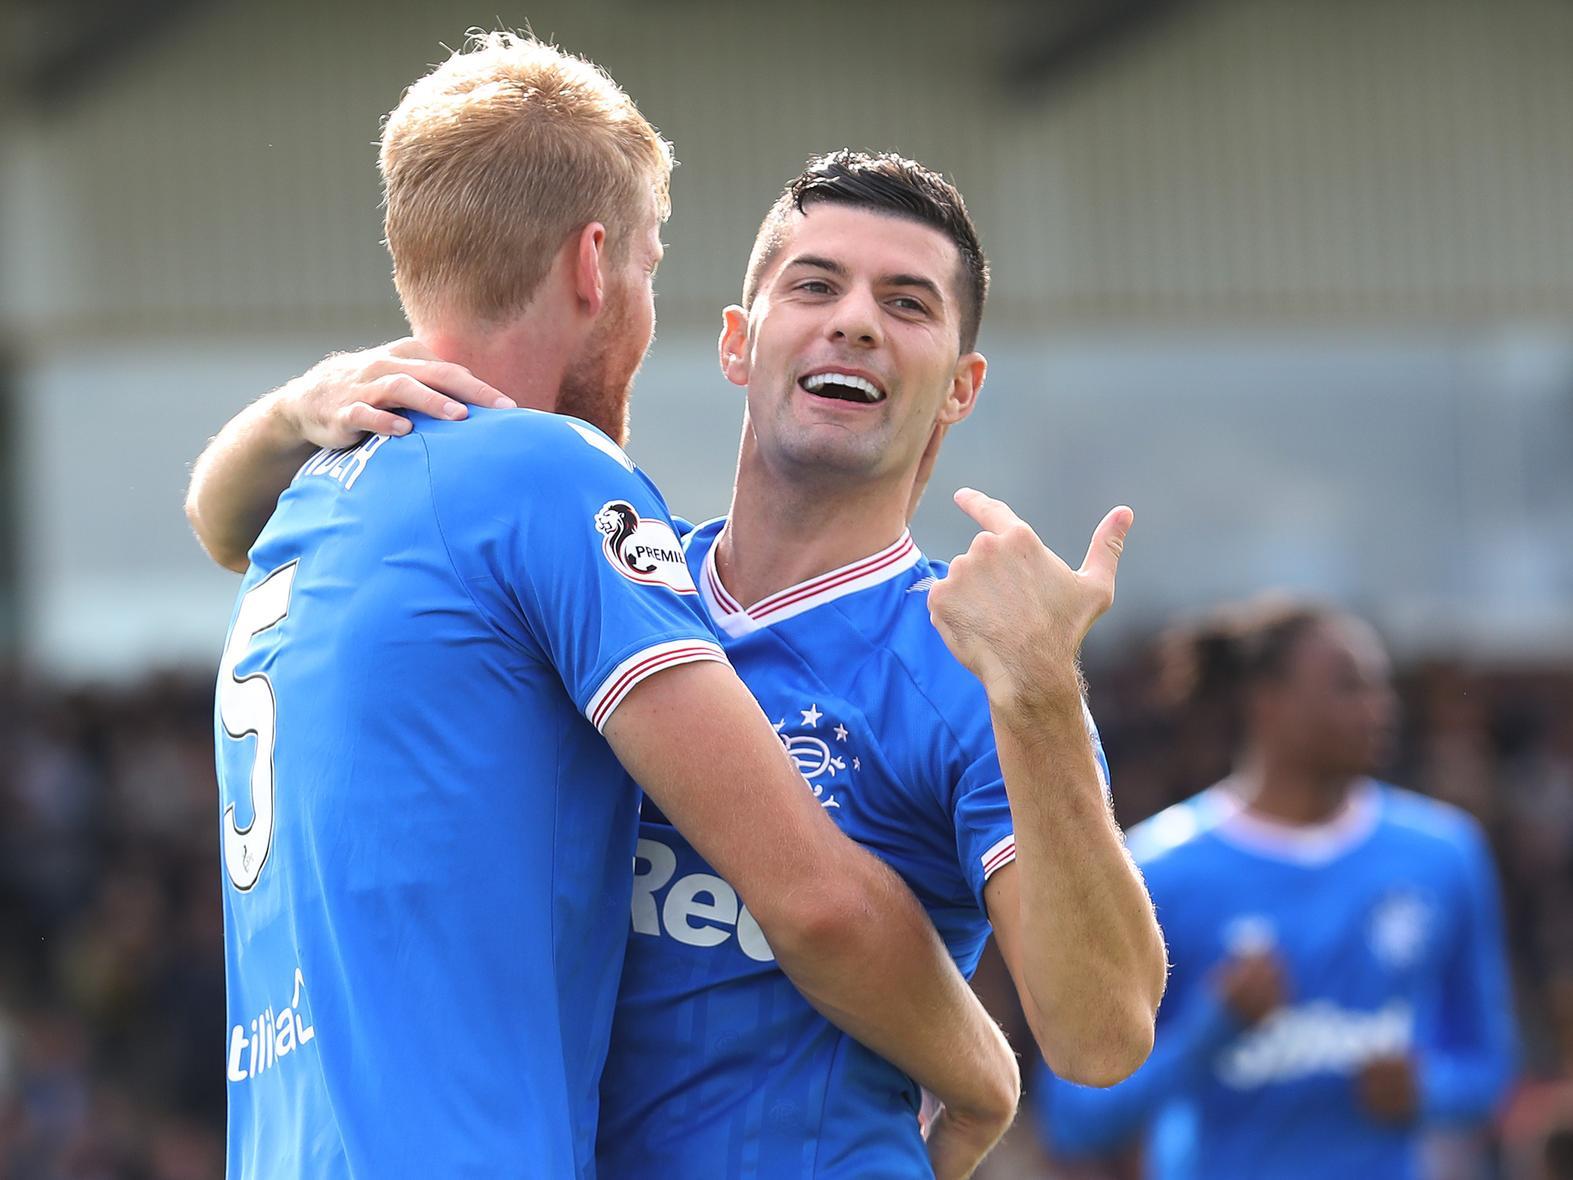 Middlesbrough are understood to be lining up at least two new signings before the deadline, with Rangers winger Jordan Jones and Livingston striker Lydon Dykes top of Jonathan Woodgate'swishlist. (Team Talk)